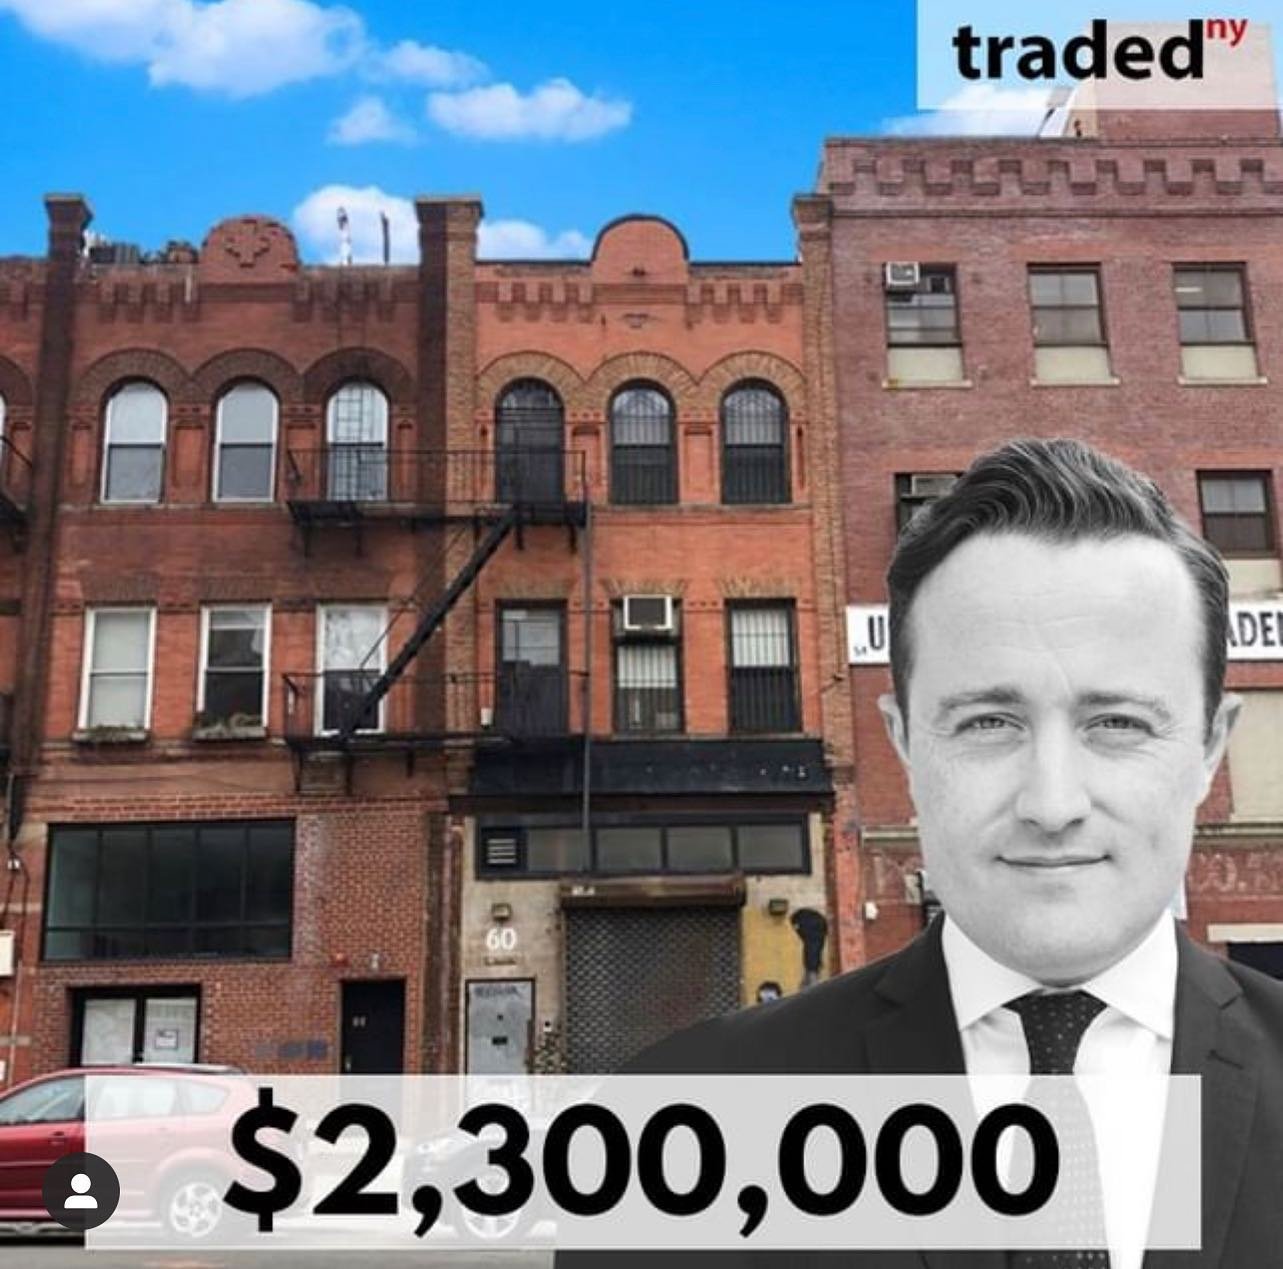 🚨 SOLD! 🚨 60 Washington Avenue | Alan Stenson of Brax Realty exclusively represented the seller in this transaction. The property was delivered vacant and located across from Steiner Studios, Dock 72 and the Brooklyn Navy Yard